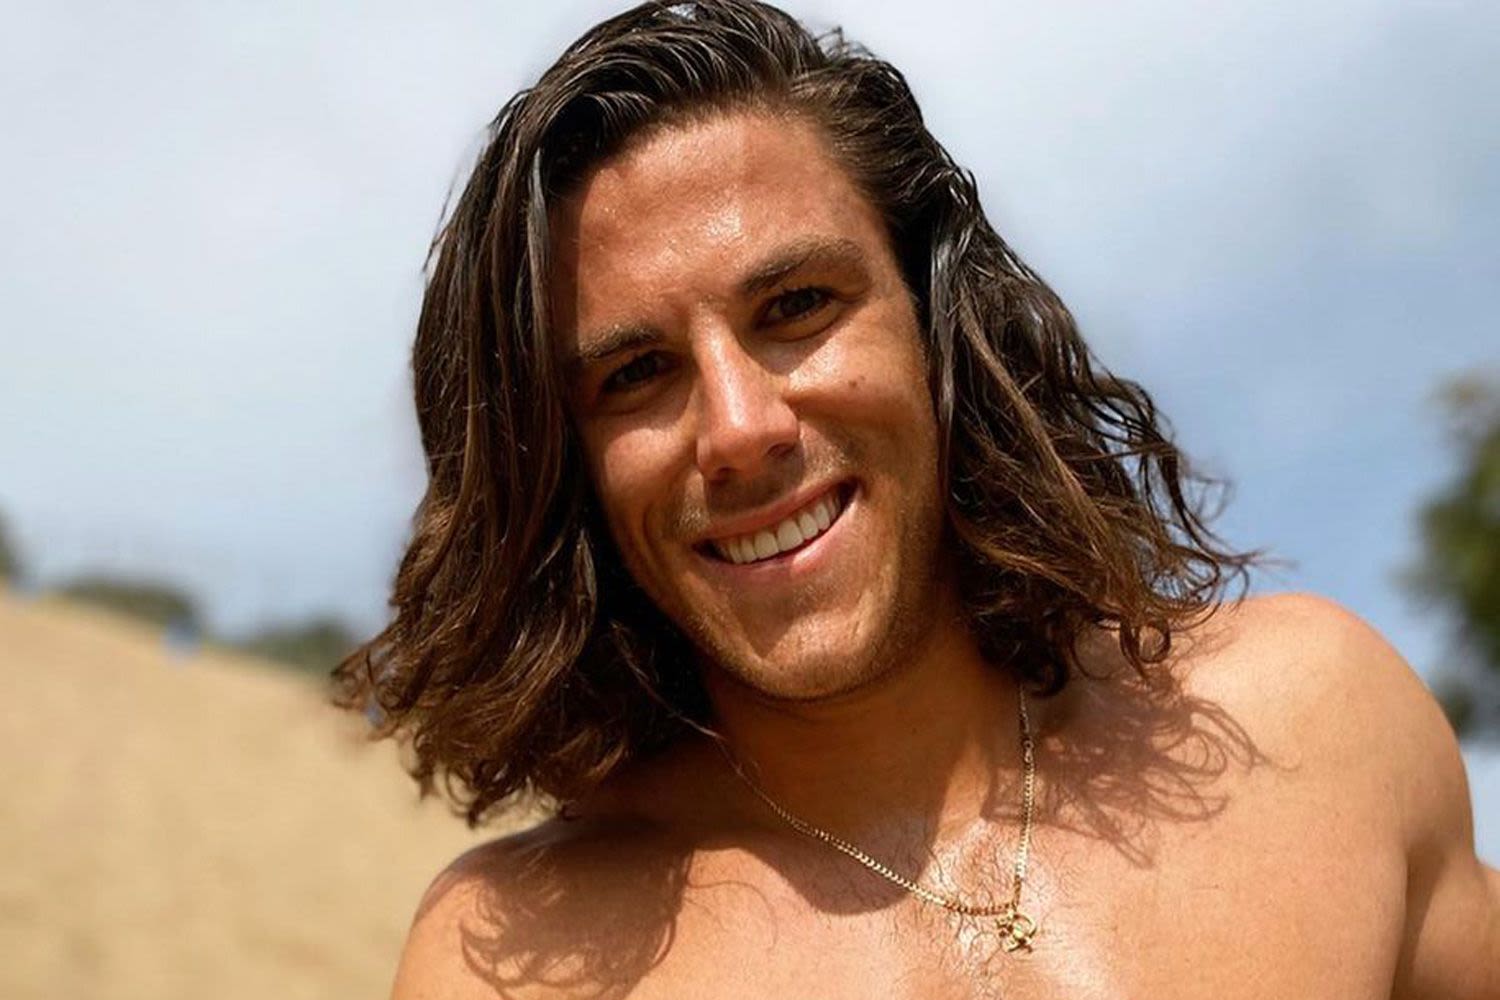 Surfer Killed in Mexico Left Girlfriend Sweet Voicemail Before He Was Killed: 'Just Thinking About You'